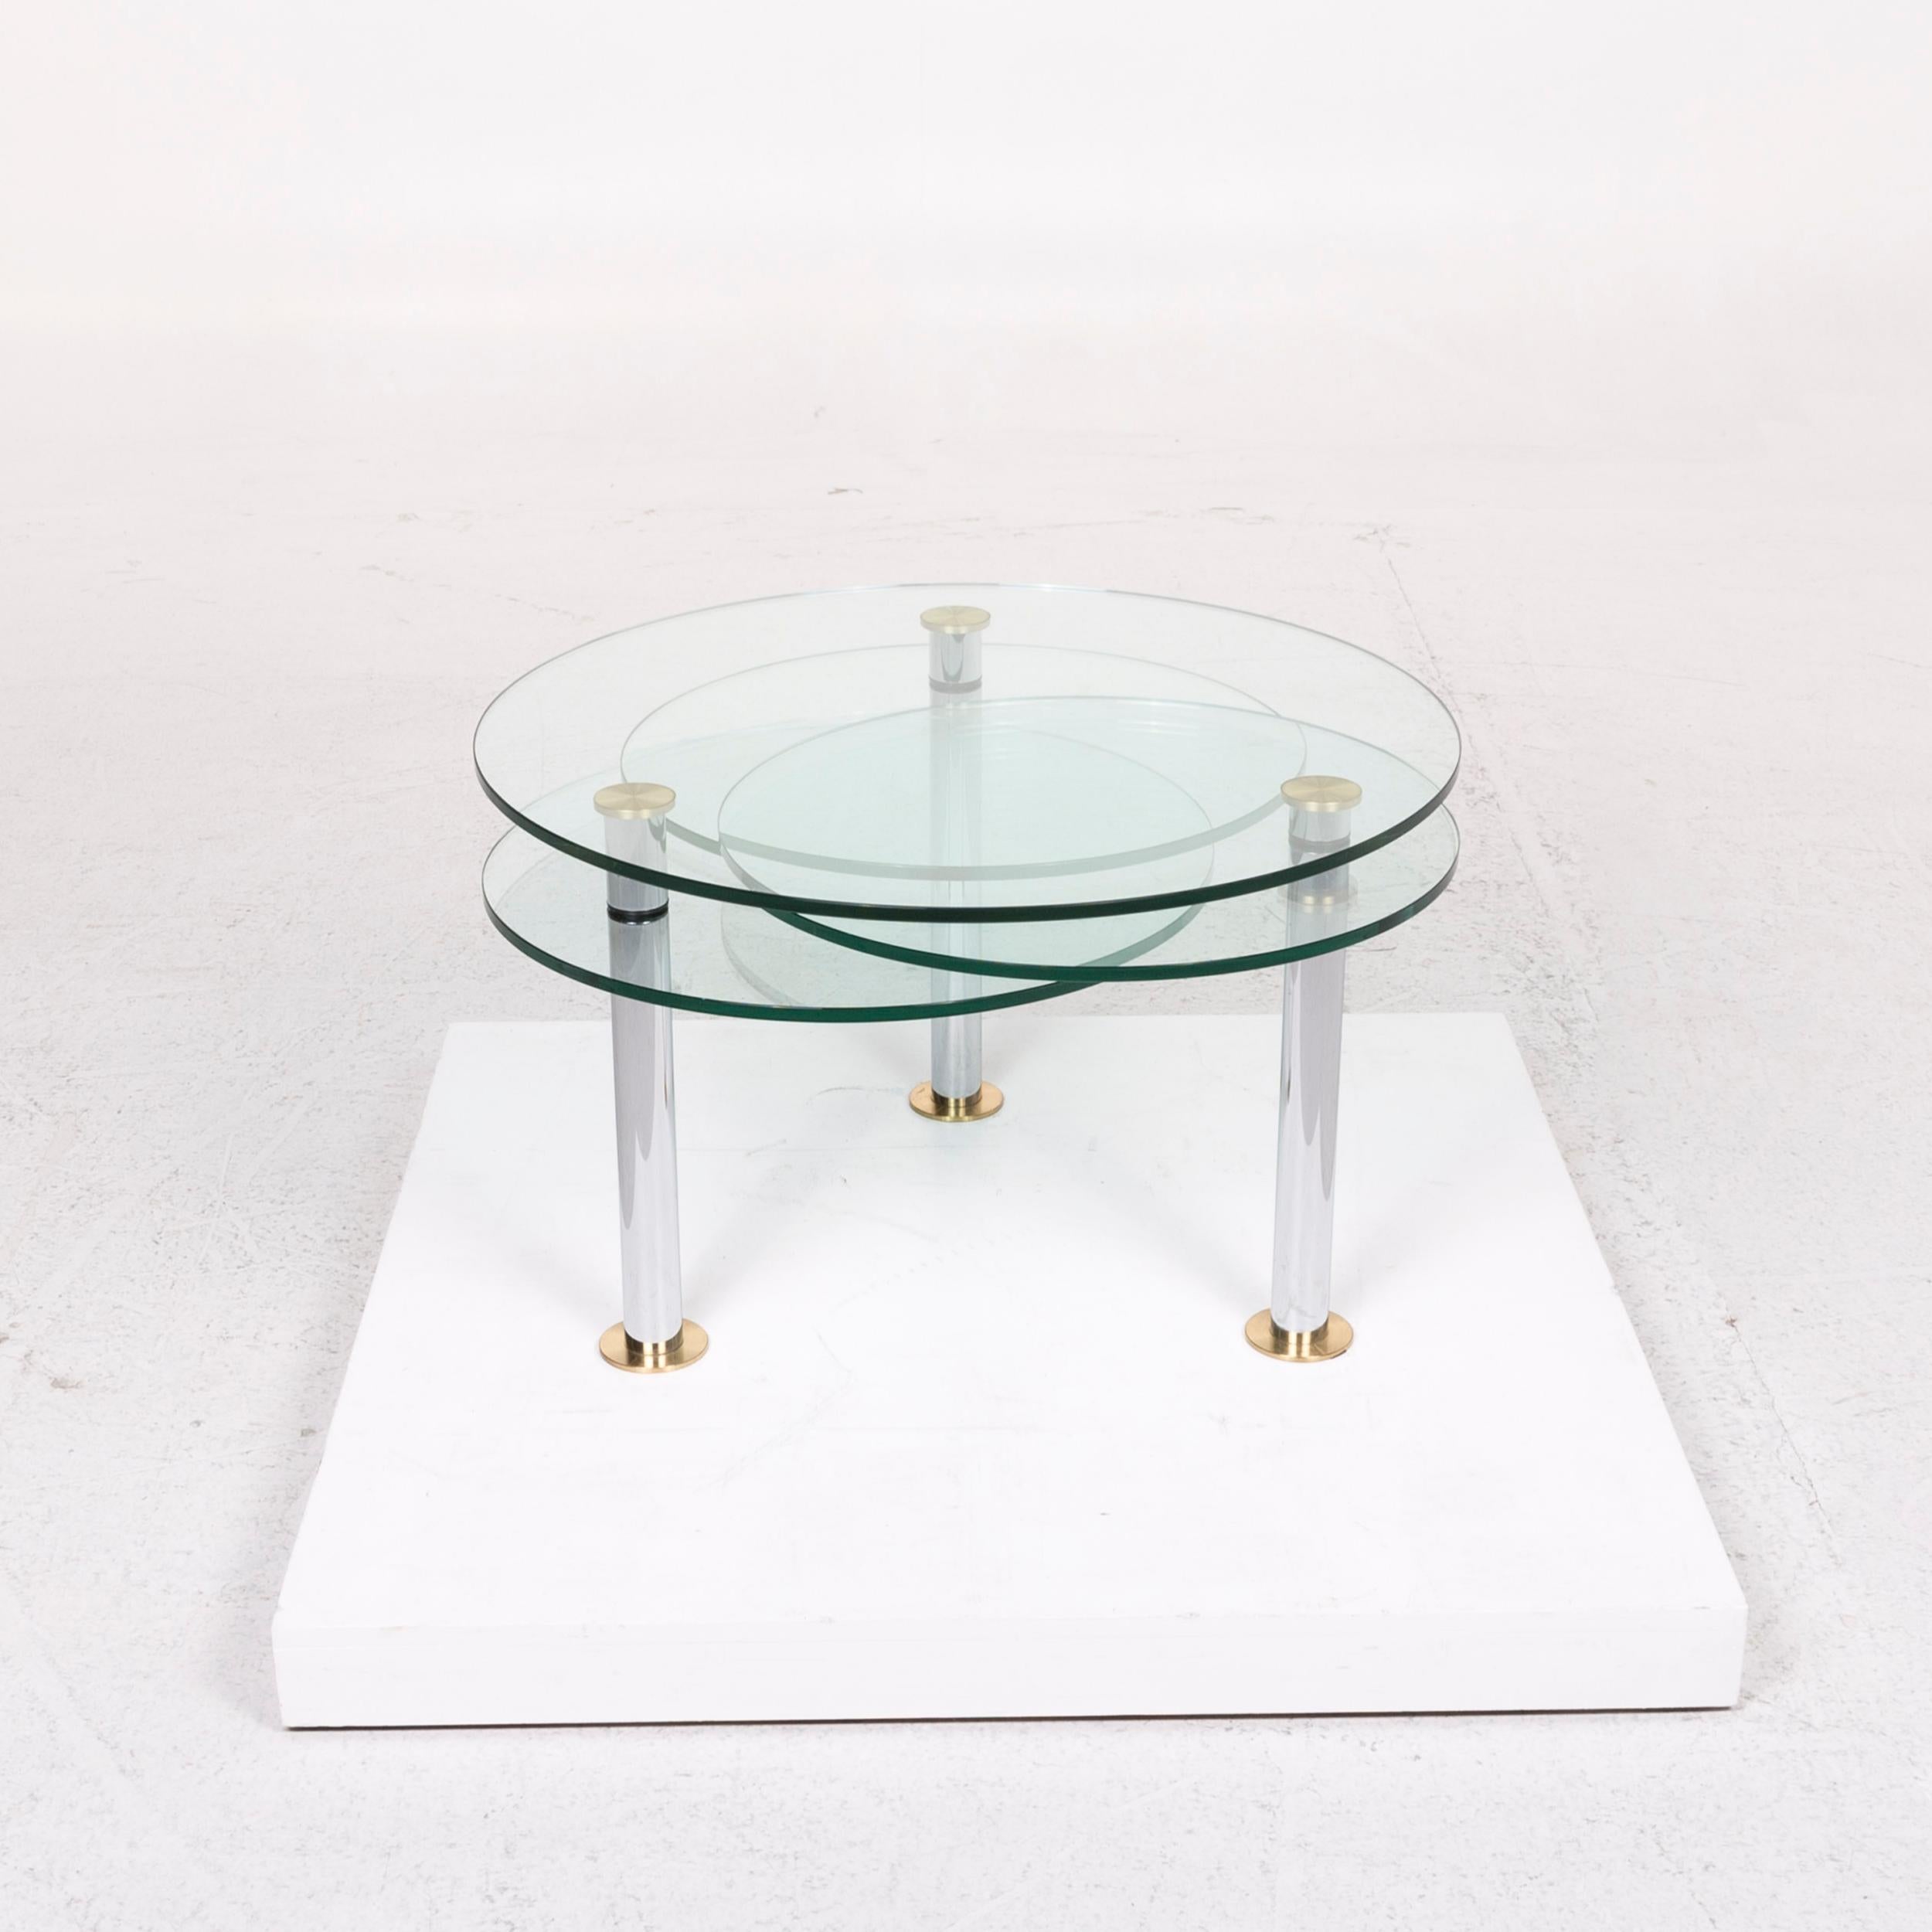 Draenert Glass Coffee Table Round Table Function Flexible In Good Condition For Sale In Cologne, DE